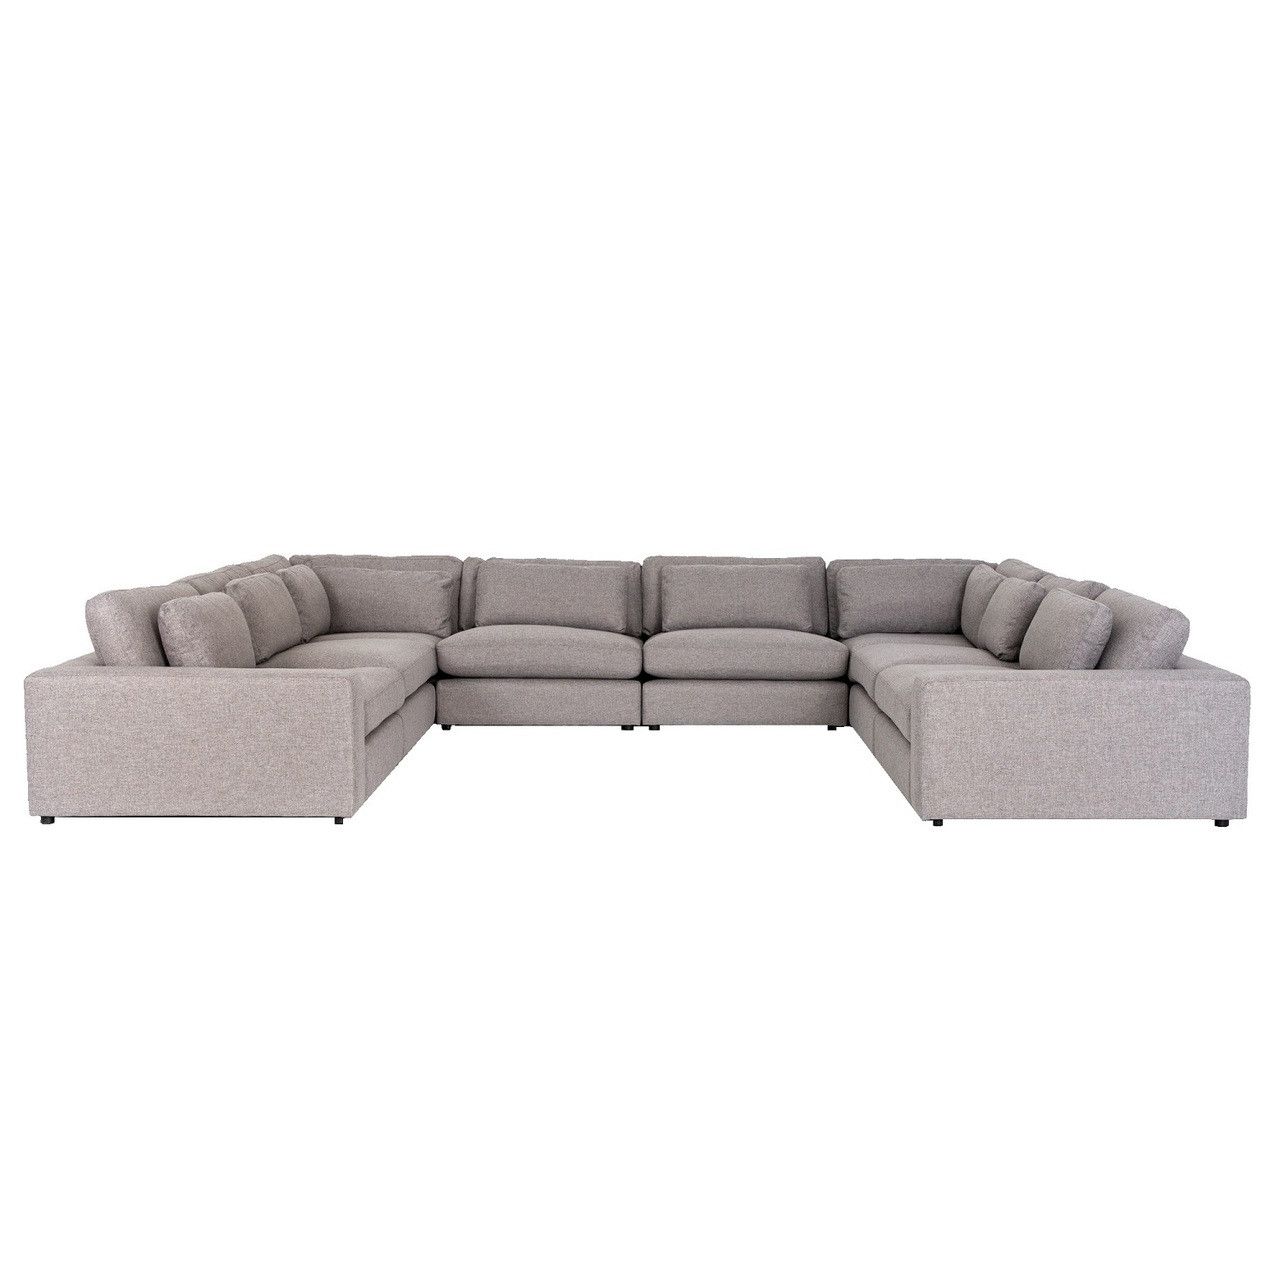 Bloor Contemporary Gray Fabric 8 Piece U Shaped Sectional Sofa 170" Regarding Modern U Shape Sectional Sofas In Gray (View 13 of 20)